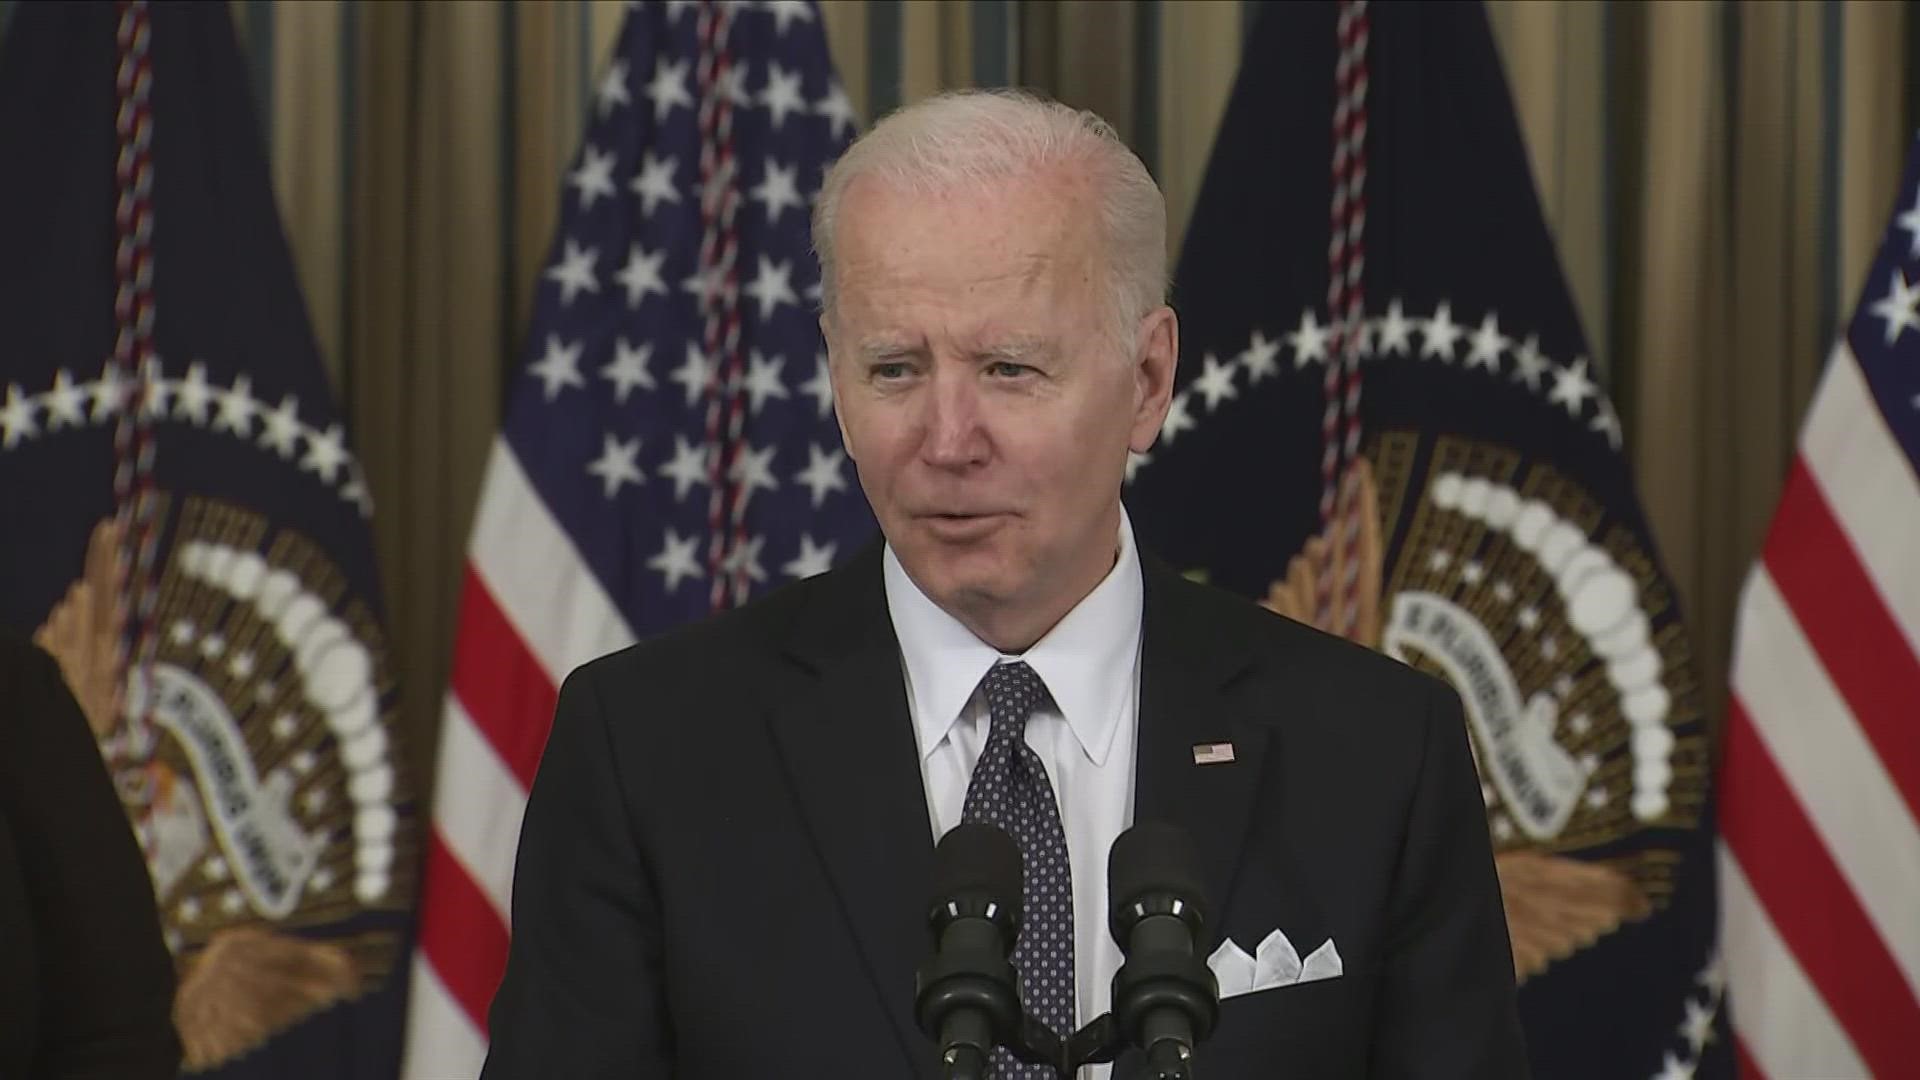 President Biden said Monday that his budget proposal sends a clear message about what his administration values.